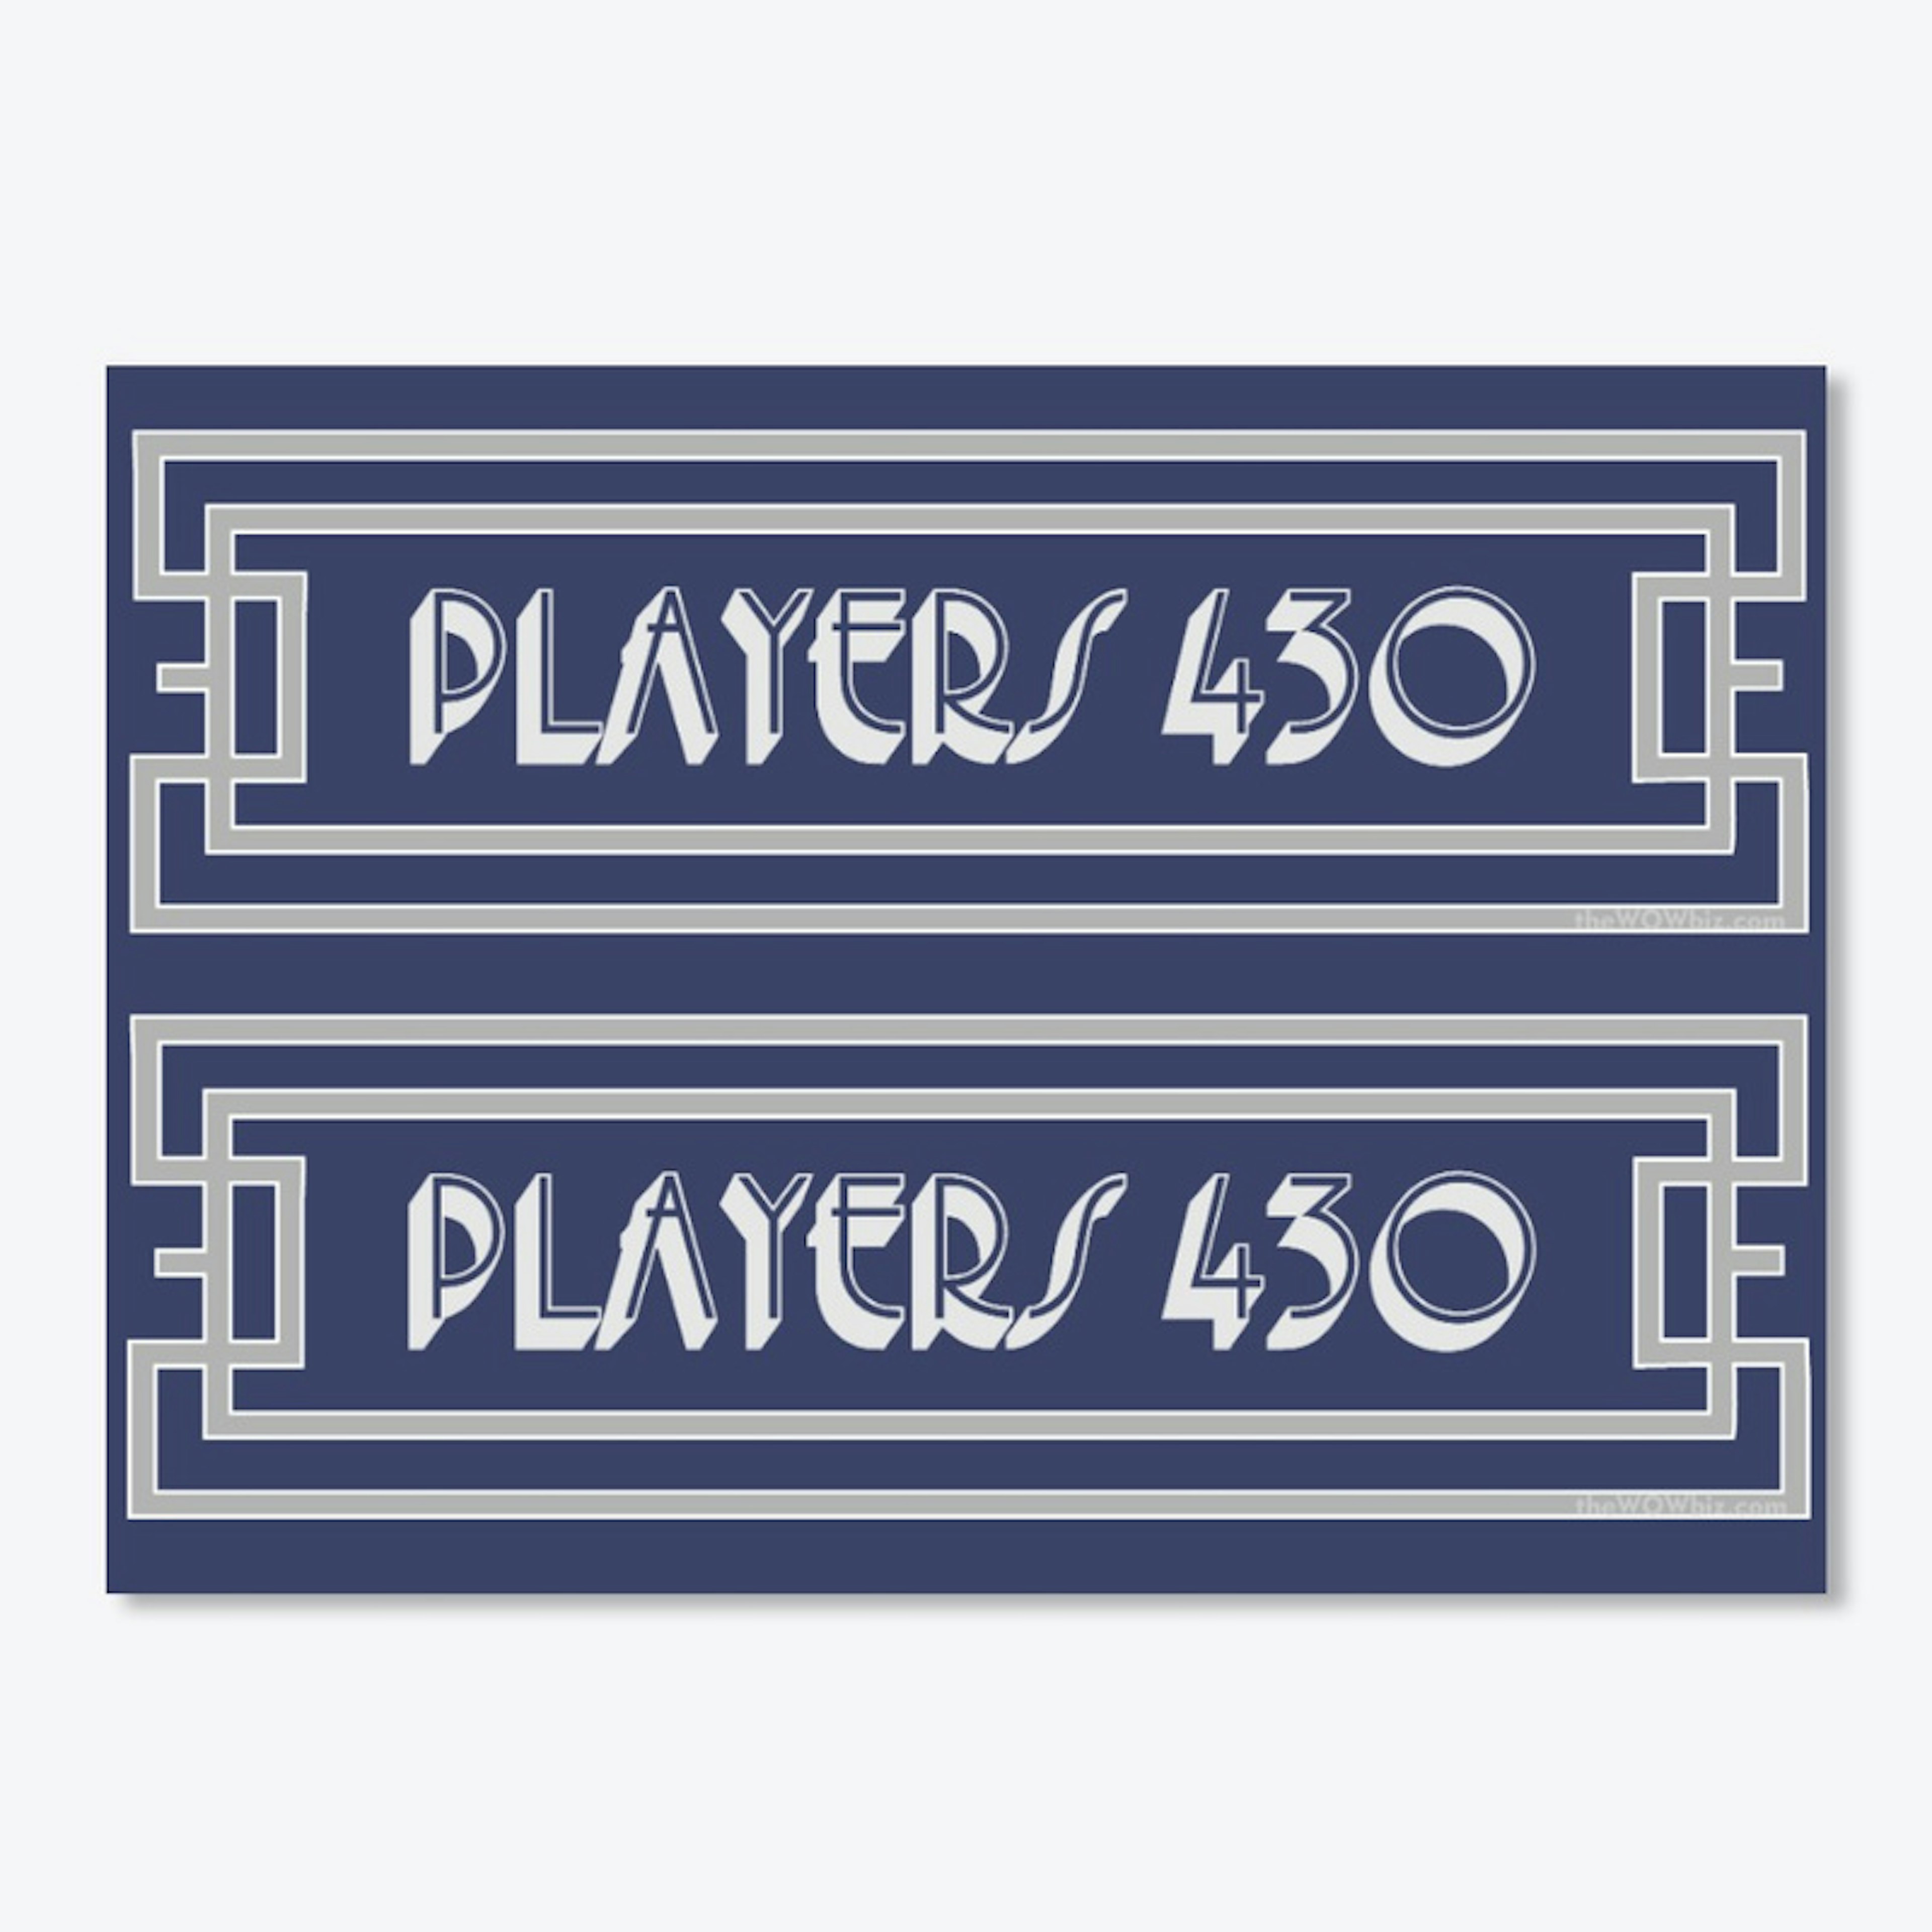 Players430